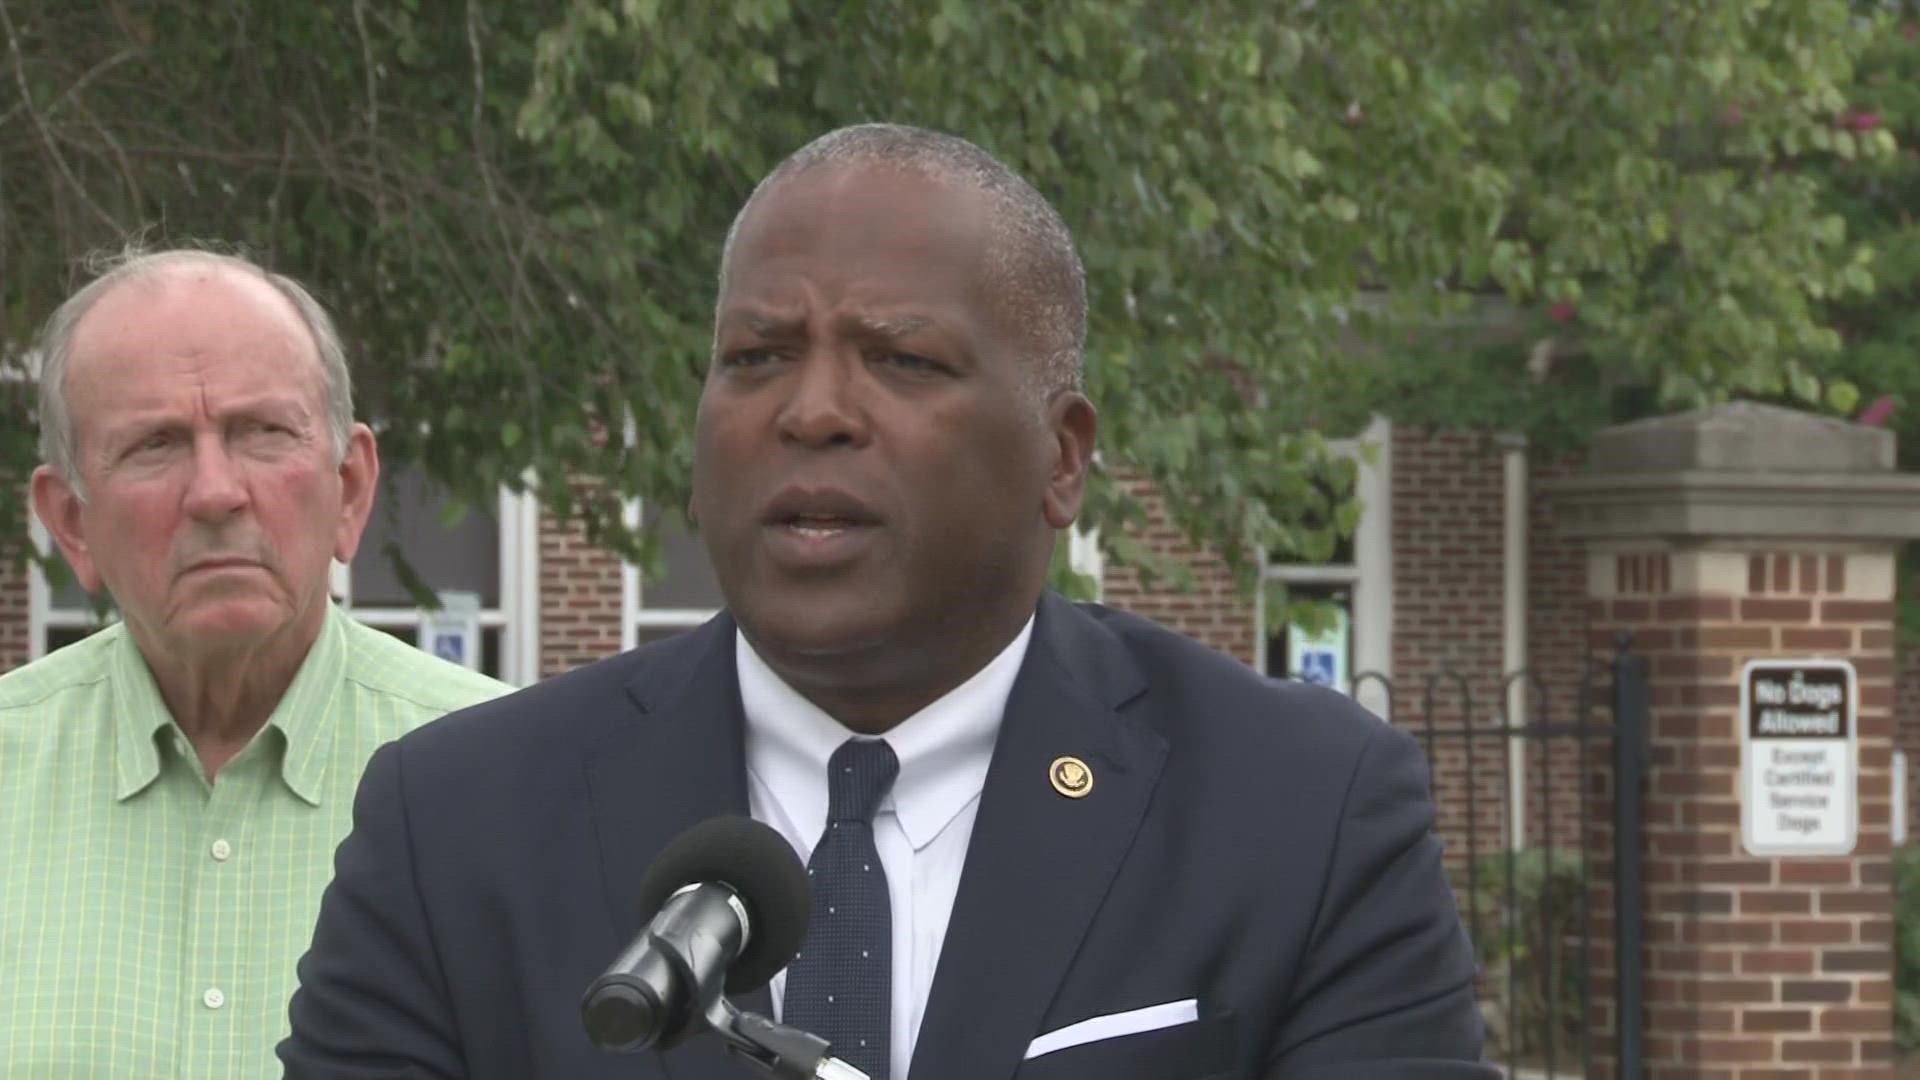 Columbia Mayor Steve Benjamin has announced a state of emergency in the city that includes a proposal for a mask mandate for schools in the city.